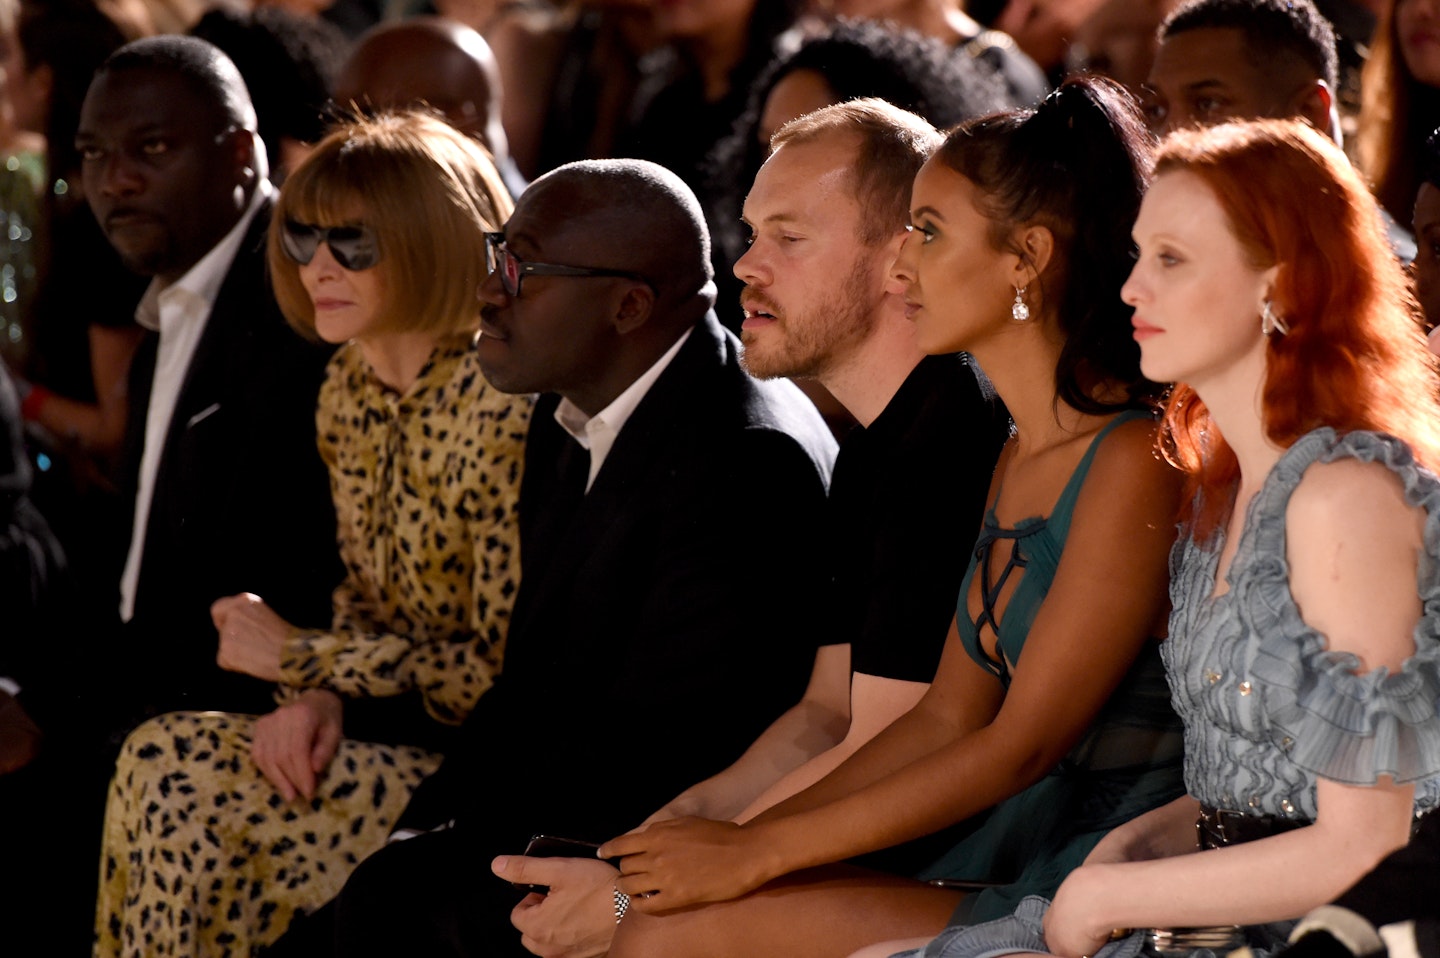 Anna Wintour, Edward Enninful and Maya Jama were among the guests on the front row